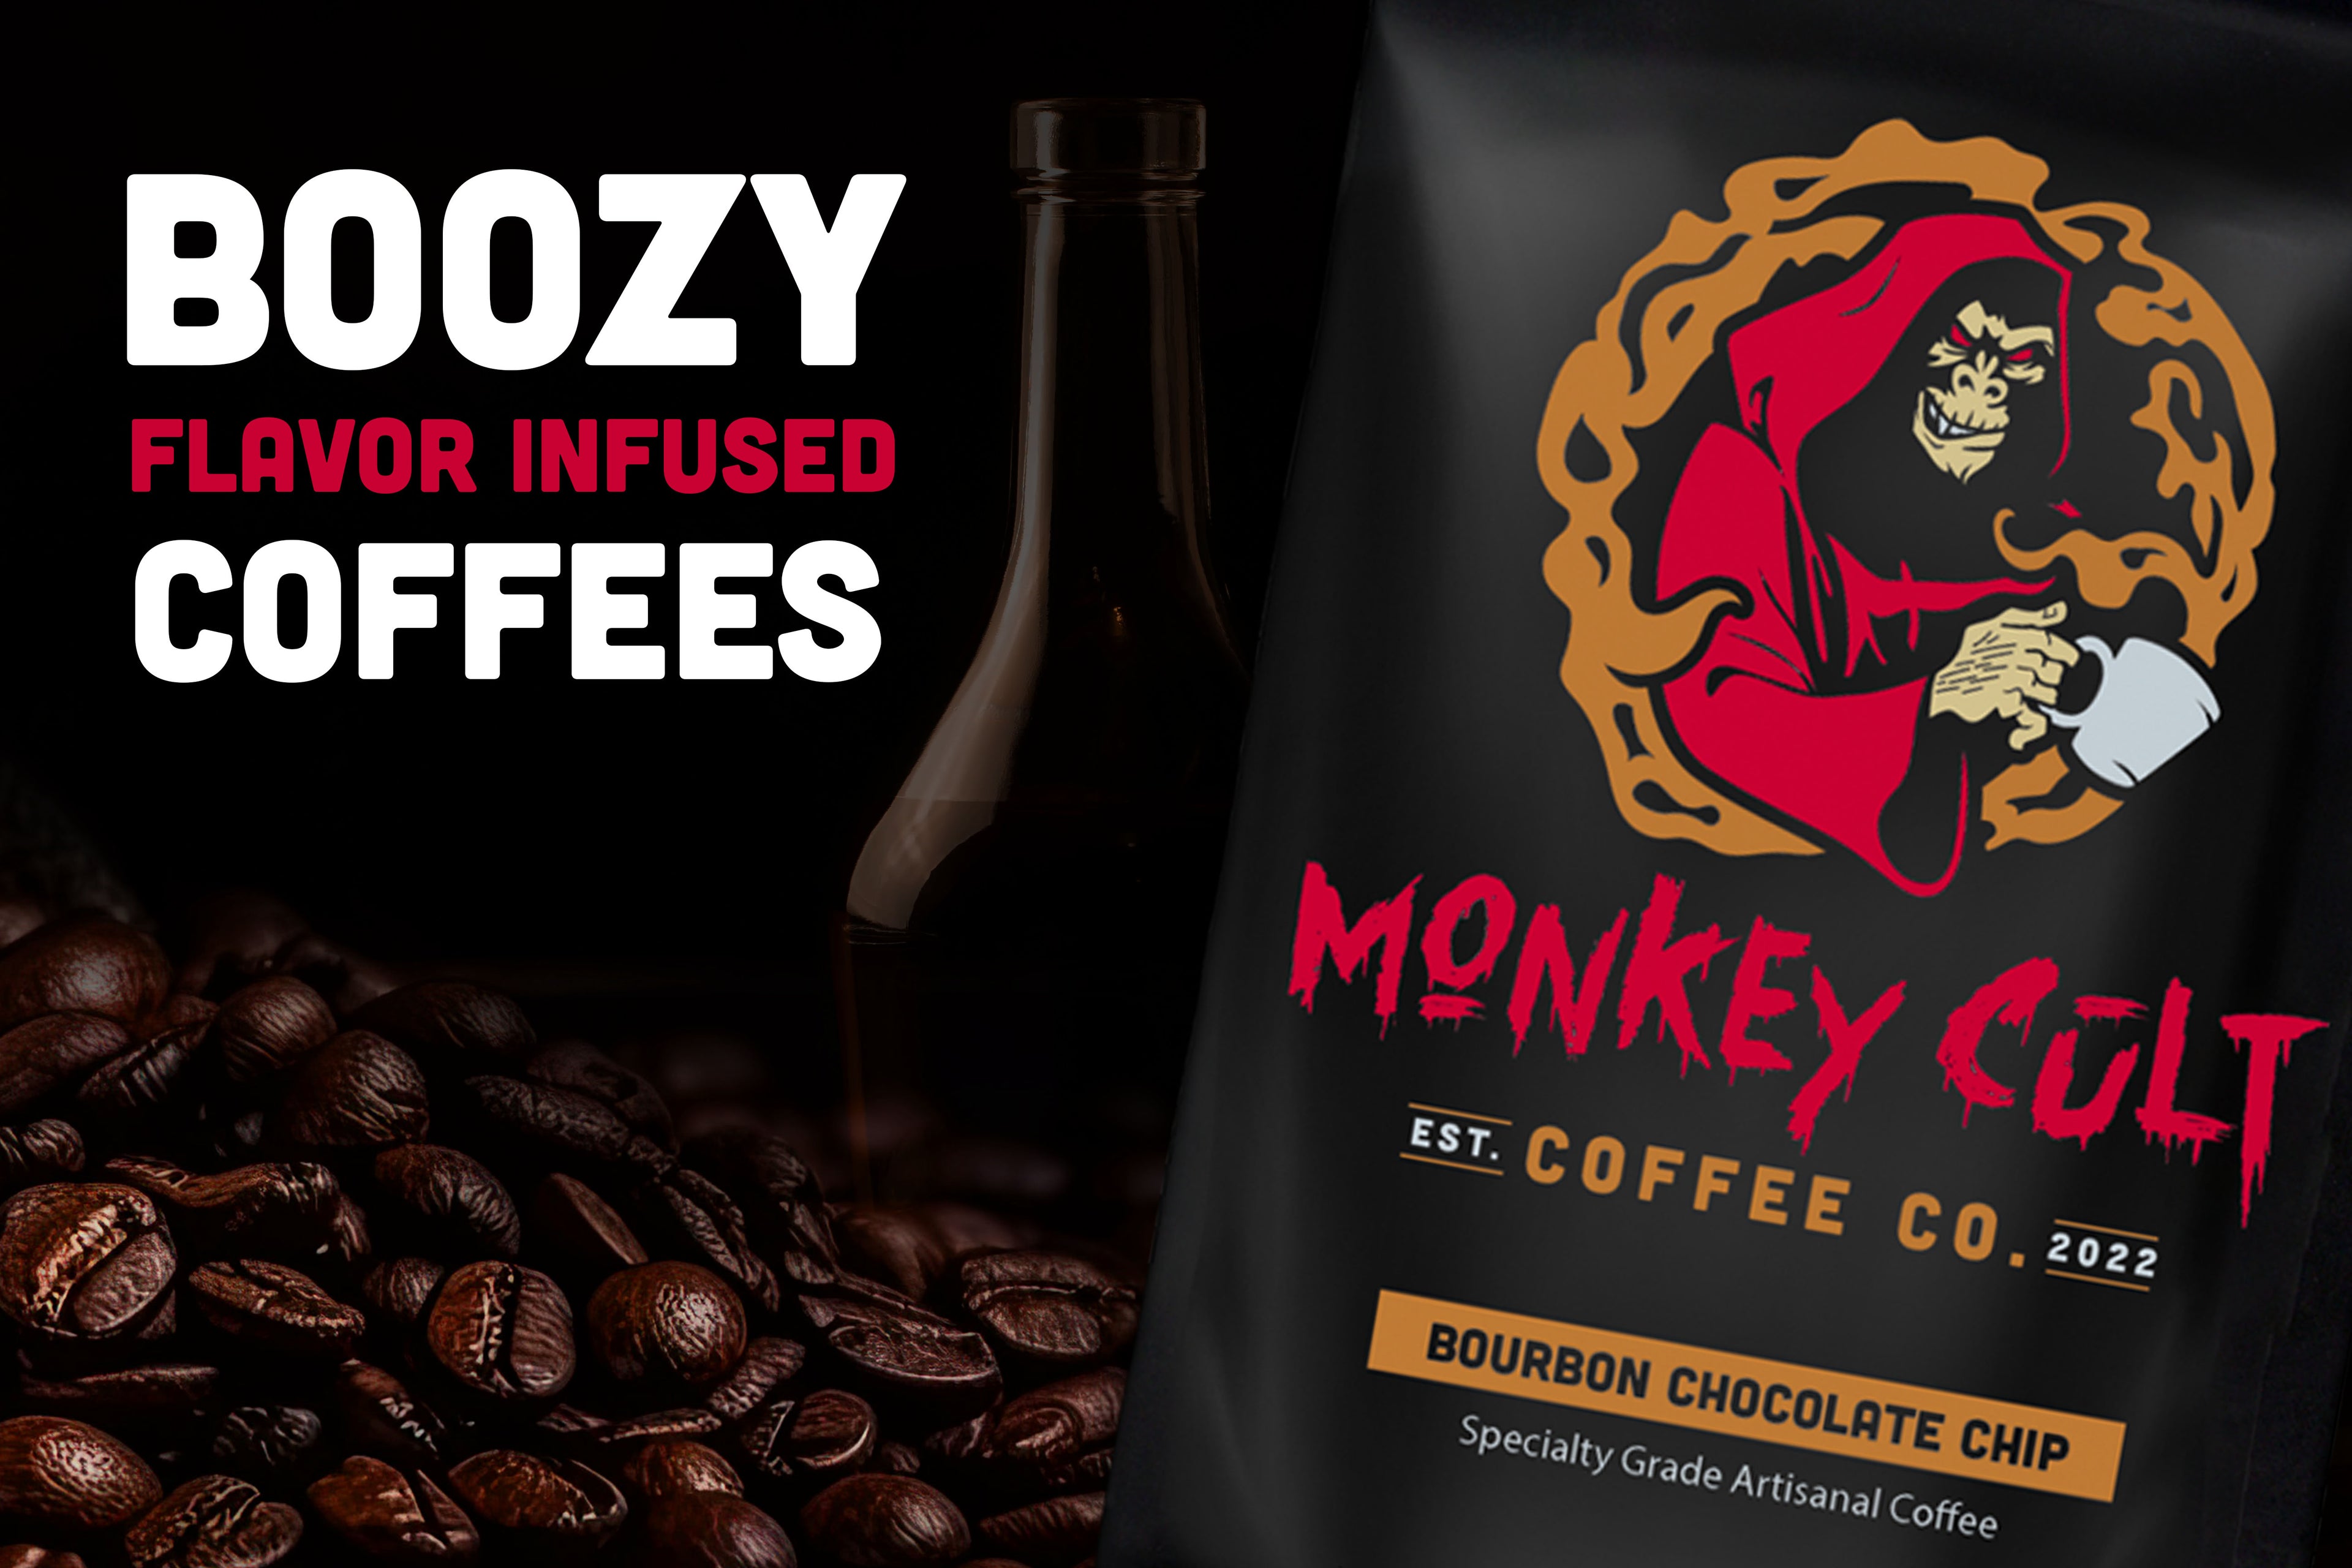 Monkey Cult Coffee brings boozy coffee flavor infused beans that make the best gifts for coffee lovers